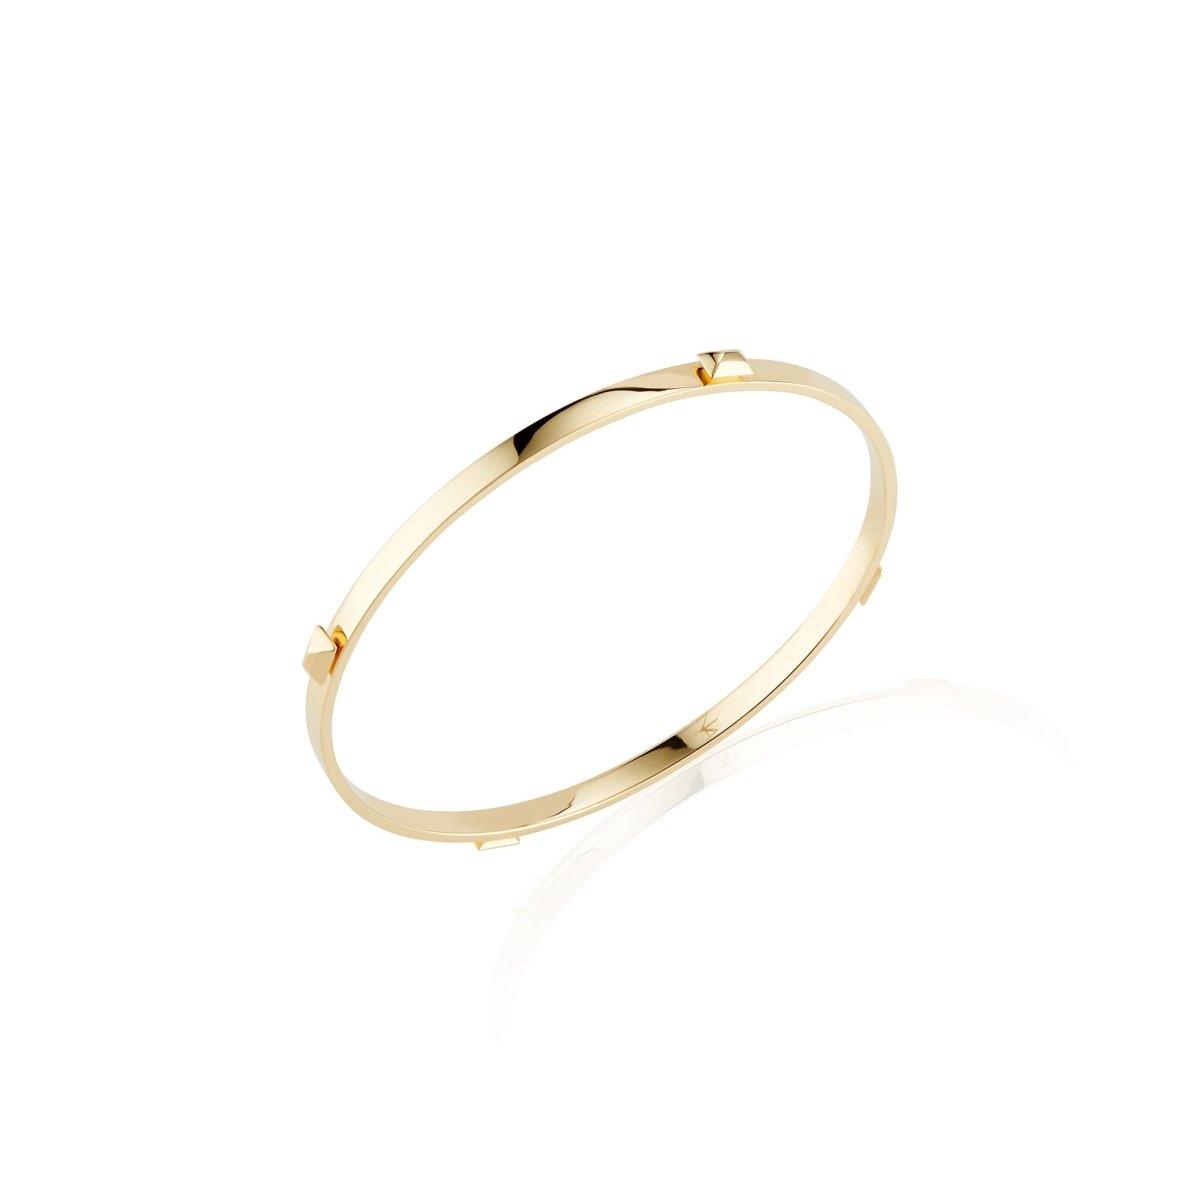 Sparks Fly Bangle Gold - Nataly Aponte